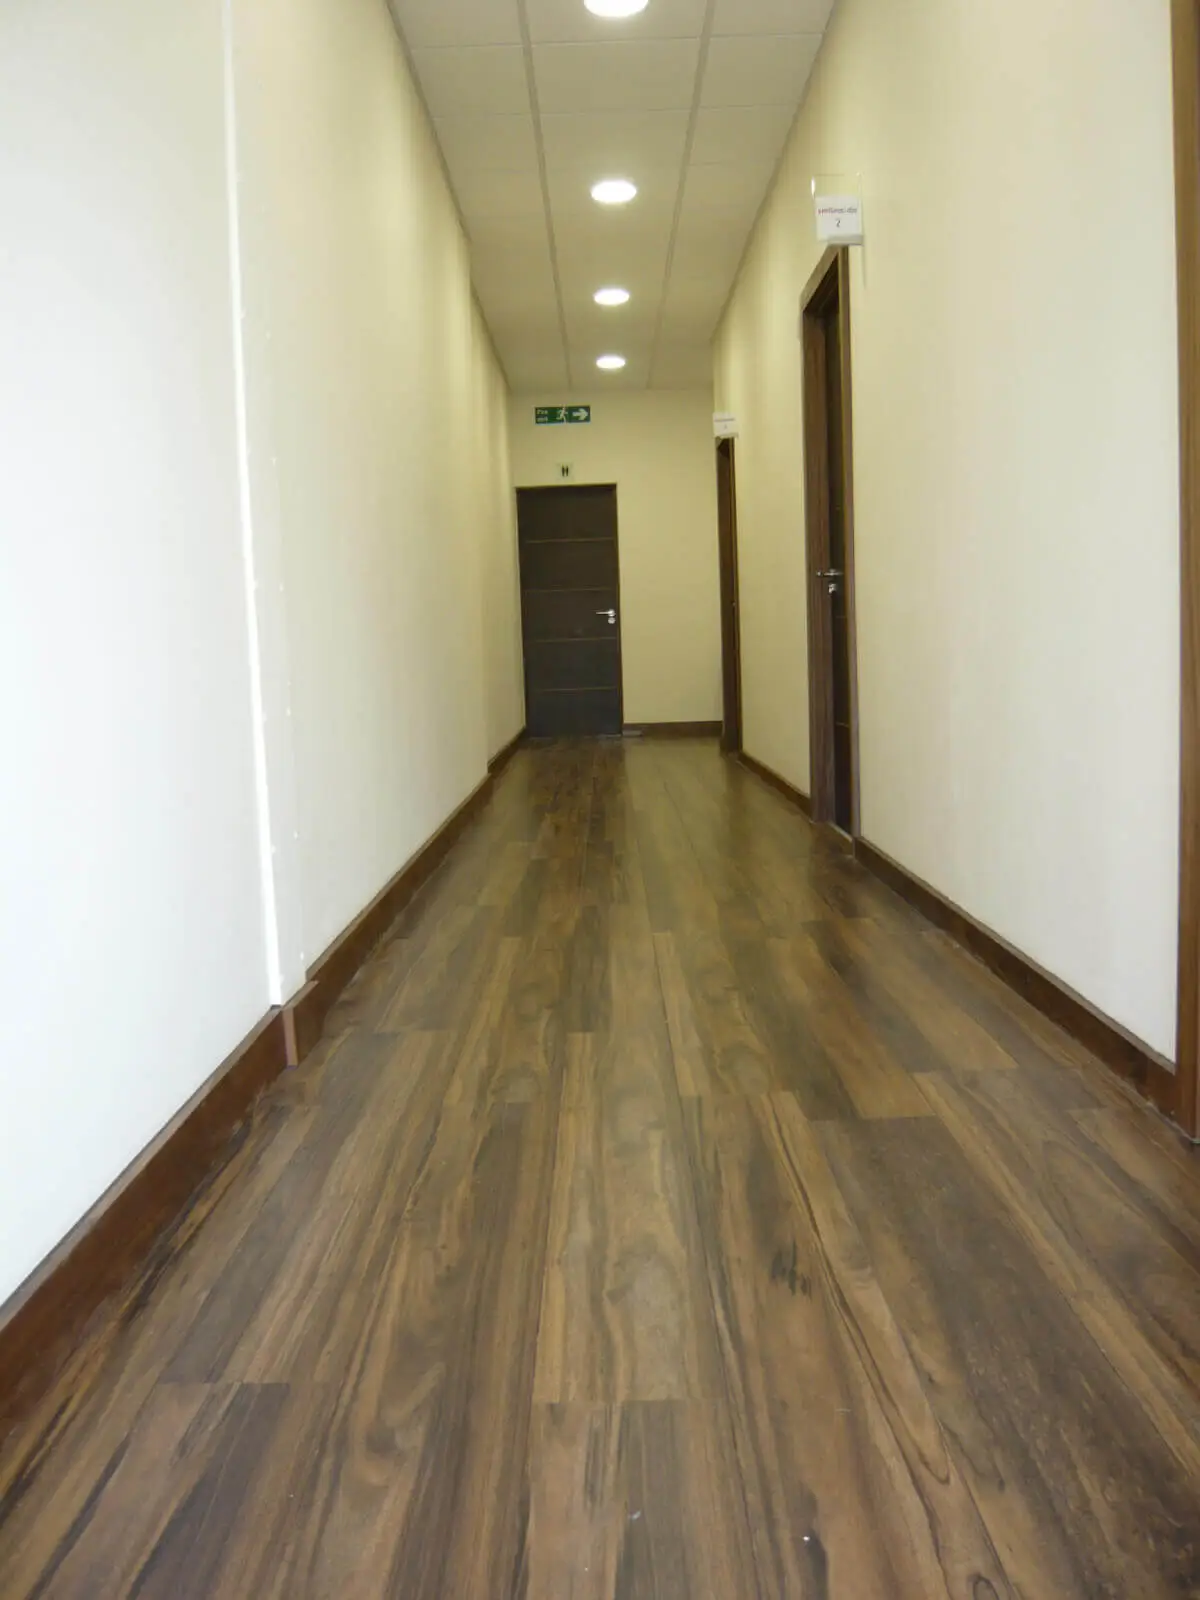 Office space with Laminated Wood Floor 9